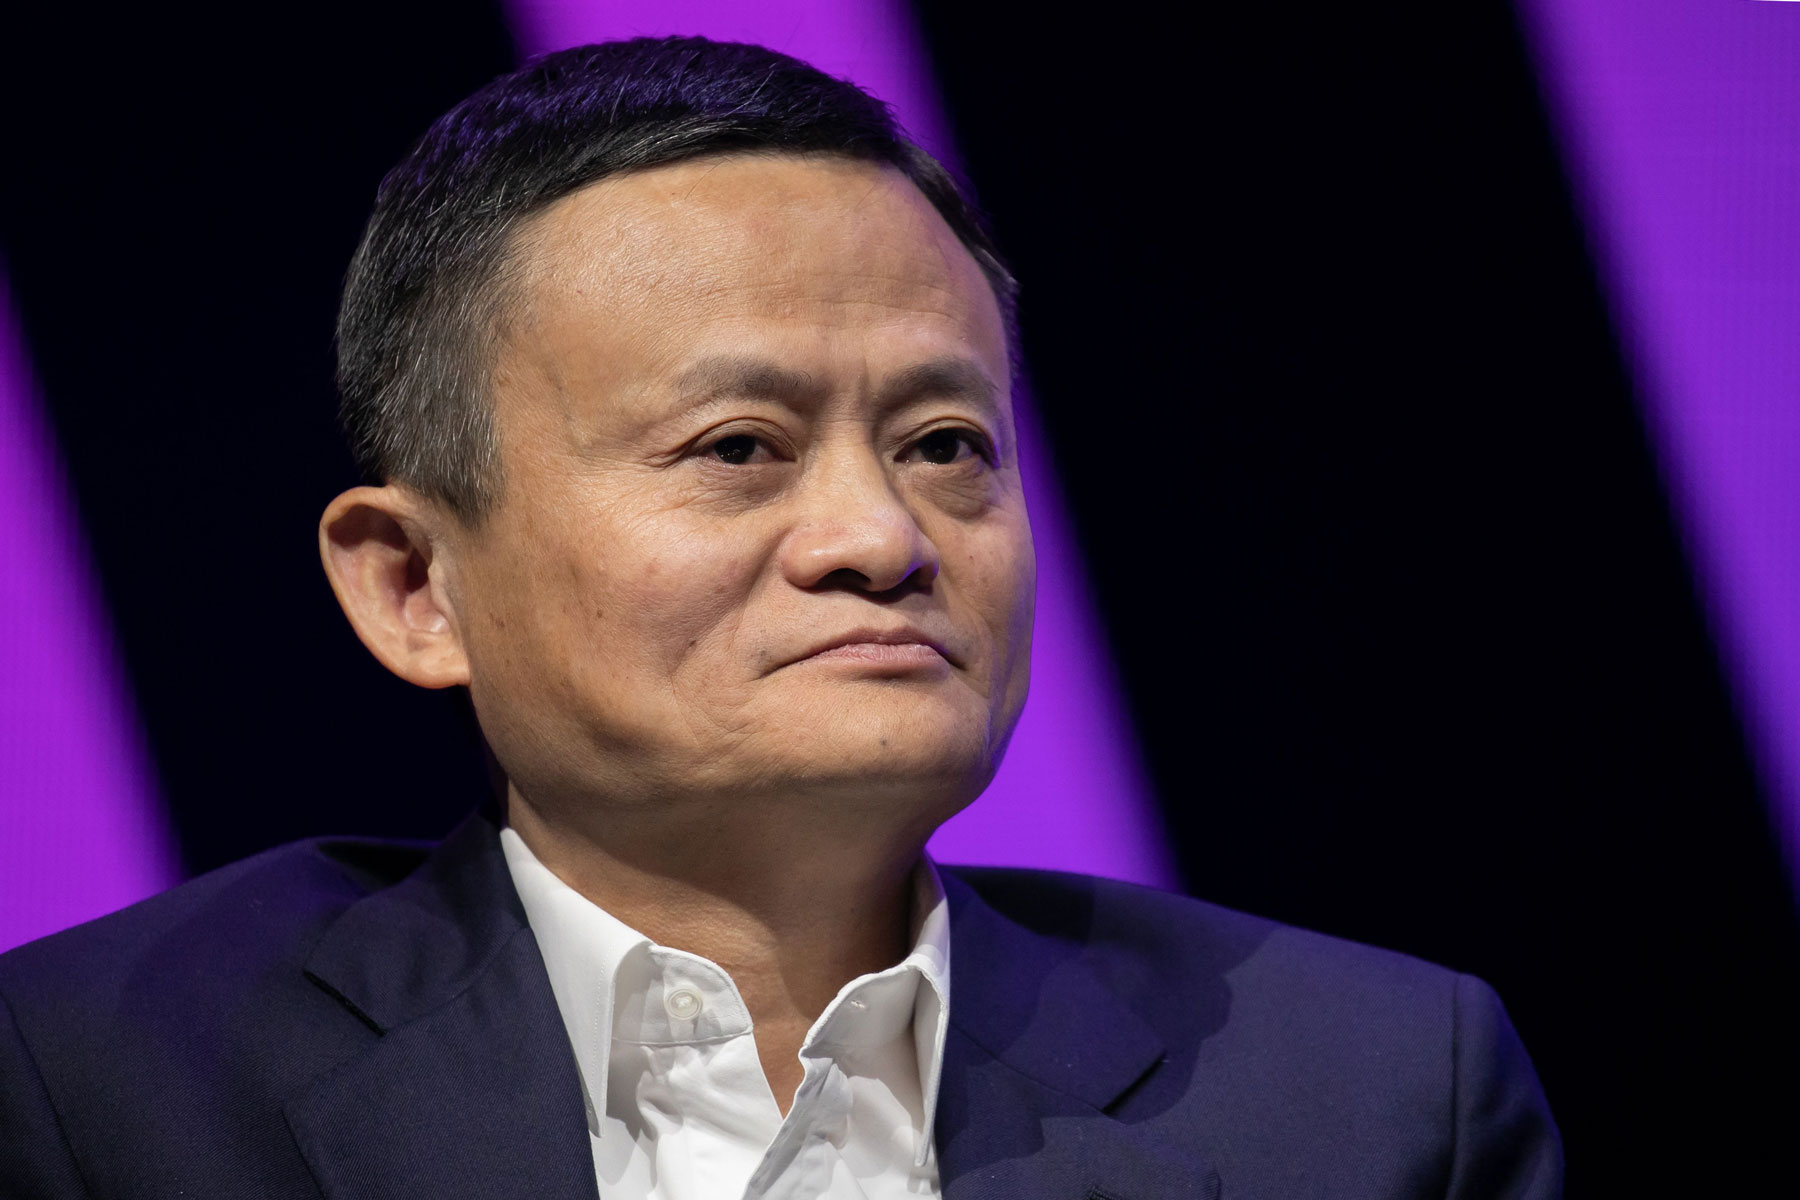 Alibaba founder Jack Ma to send face masks, medical equipment to Italy to help the fight against coronavirus. Image via Rolling Stone.